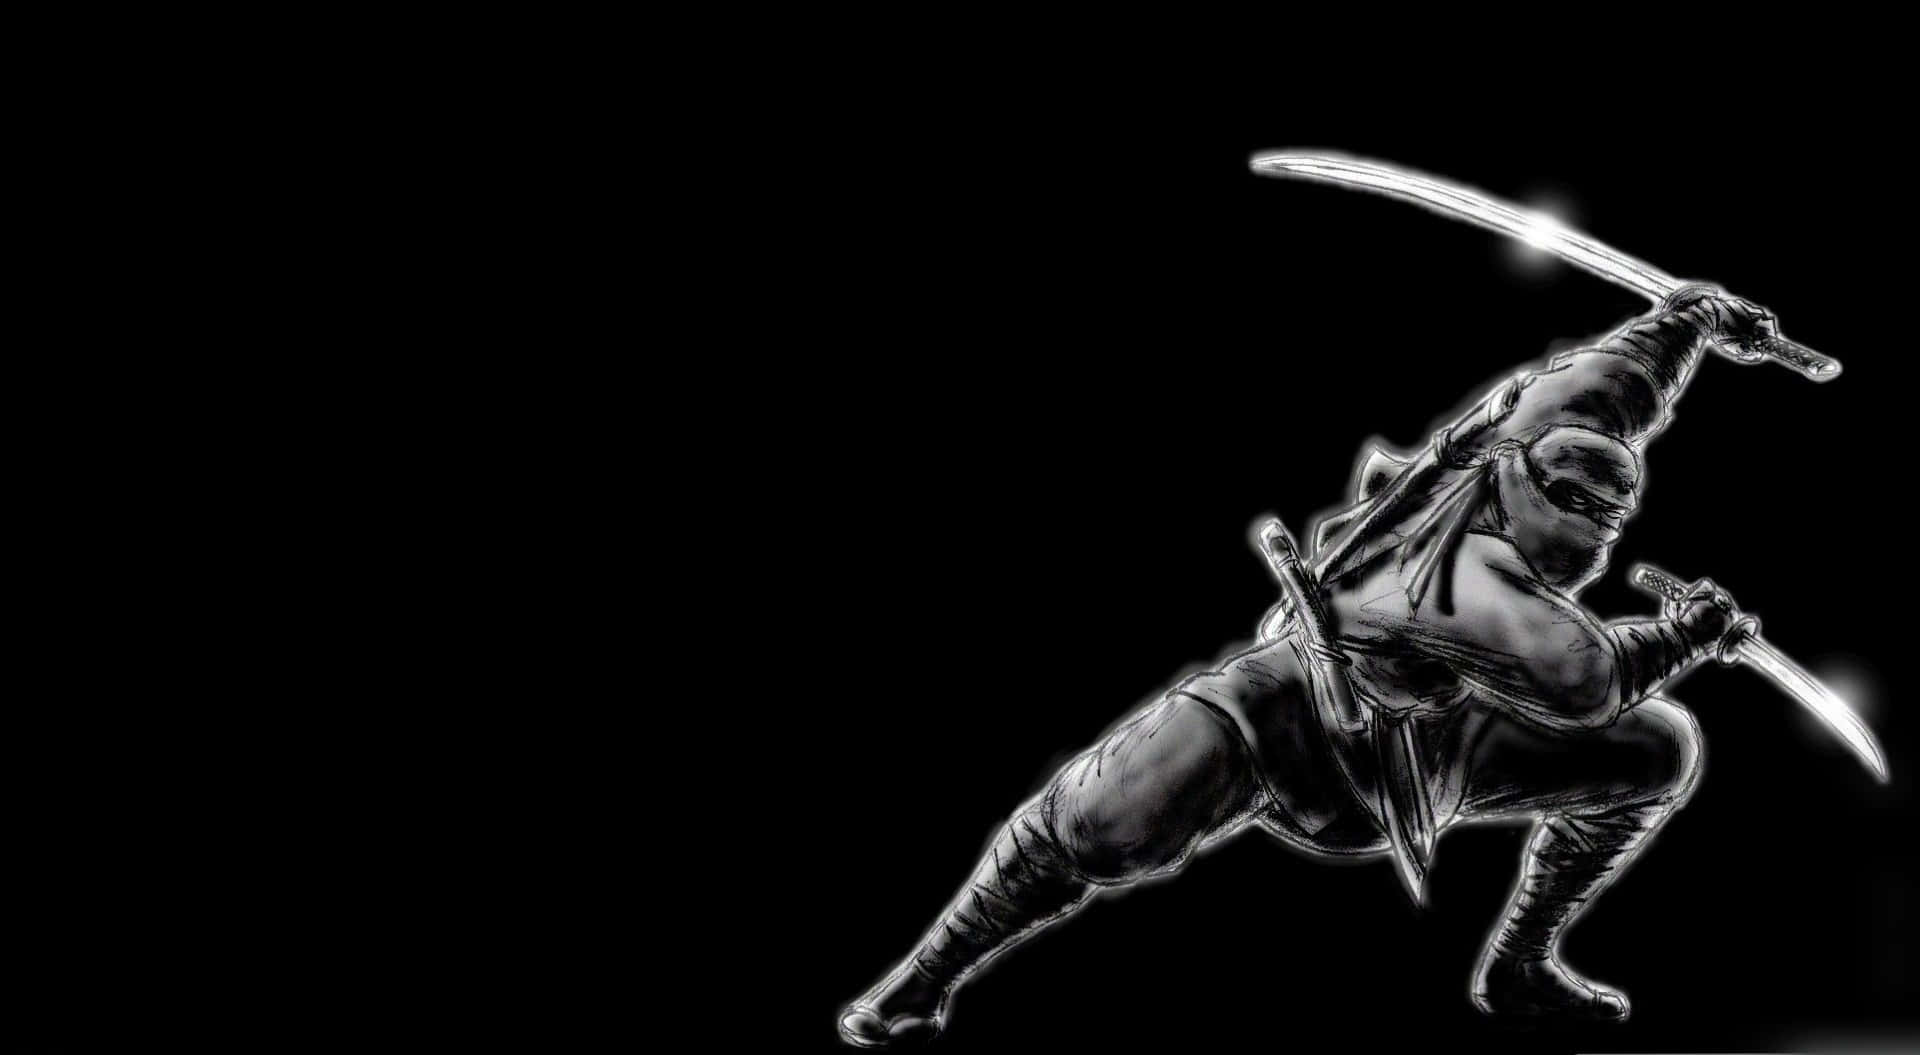 The Coolest Ninja Ready For Action Wallpaper